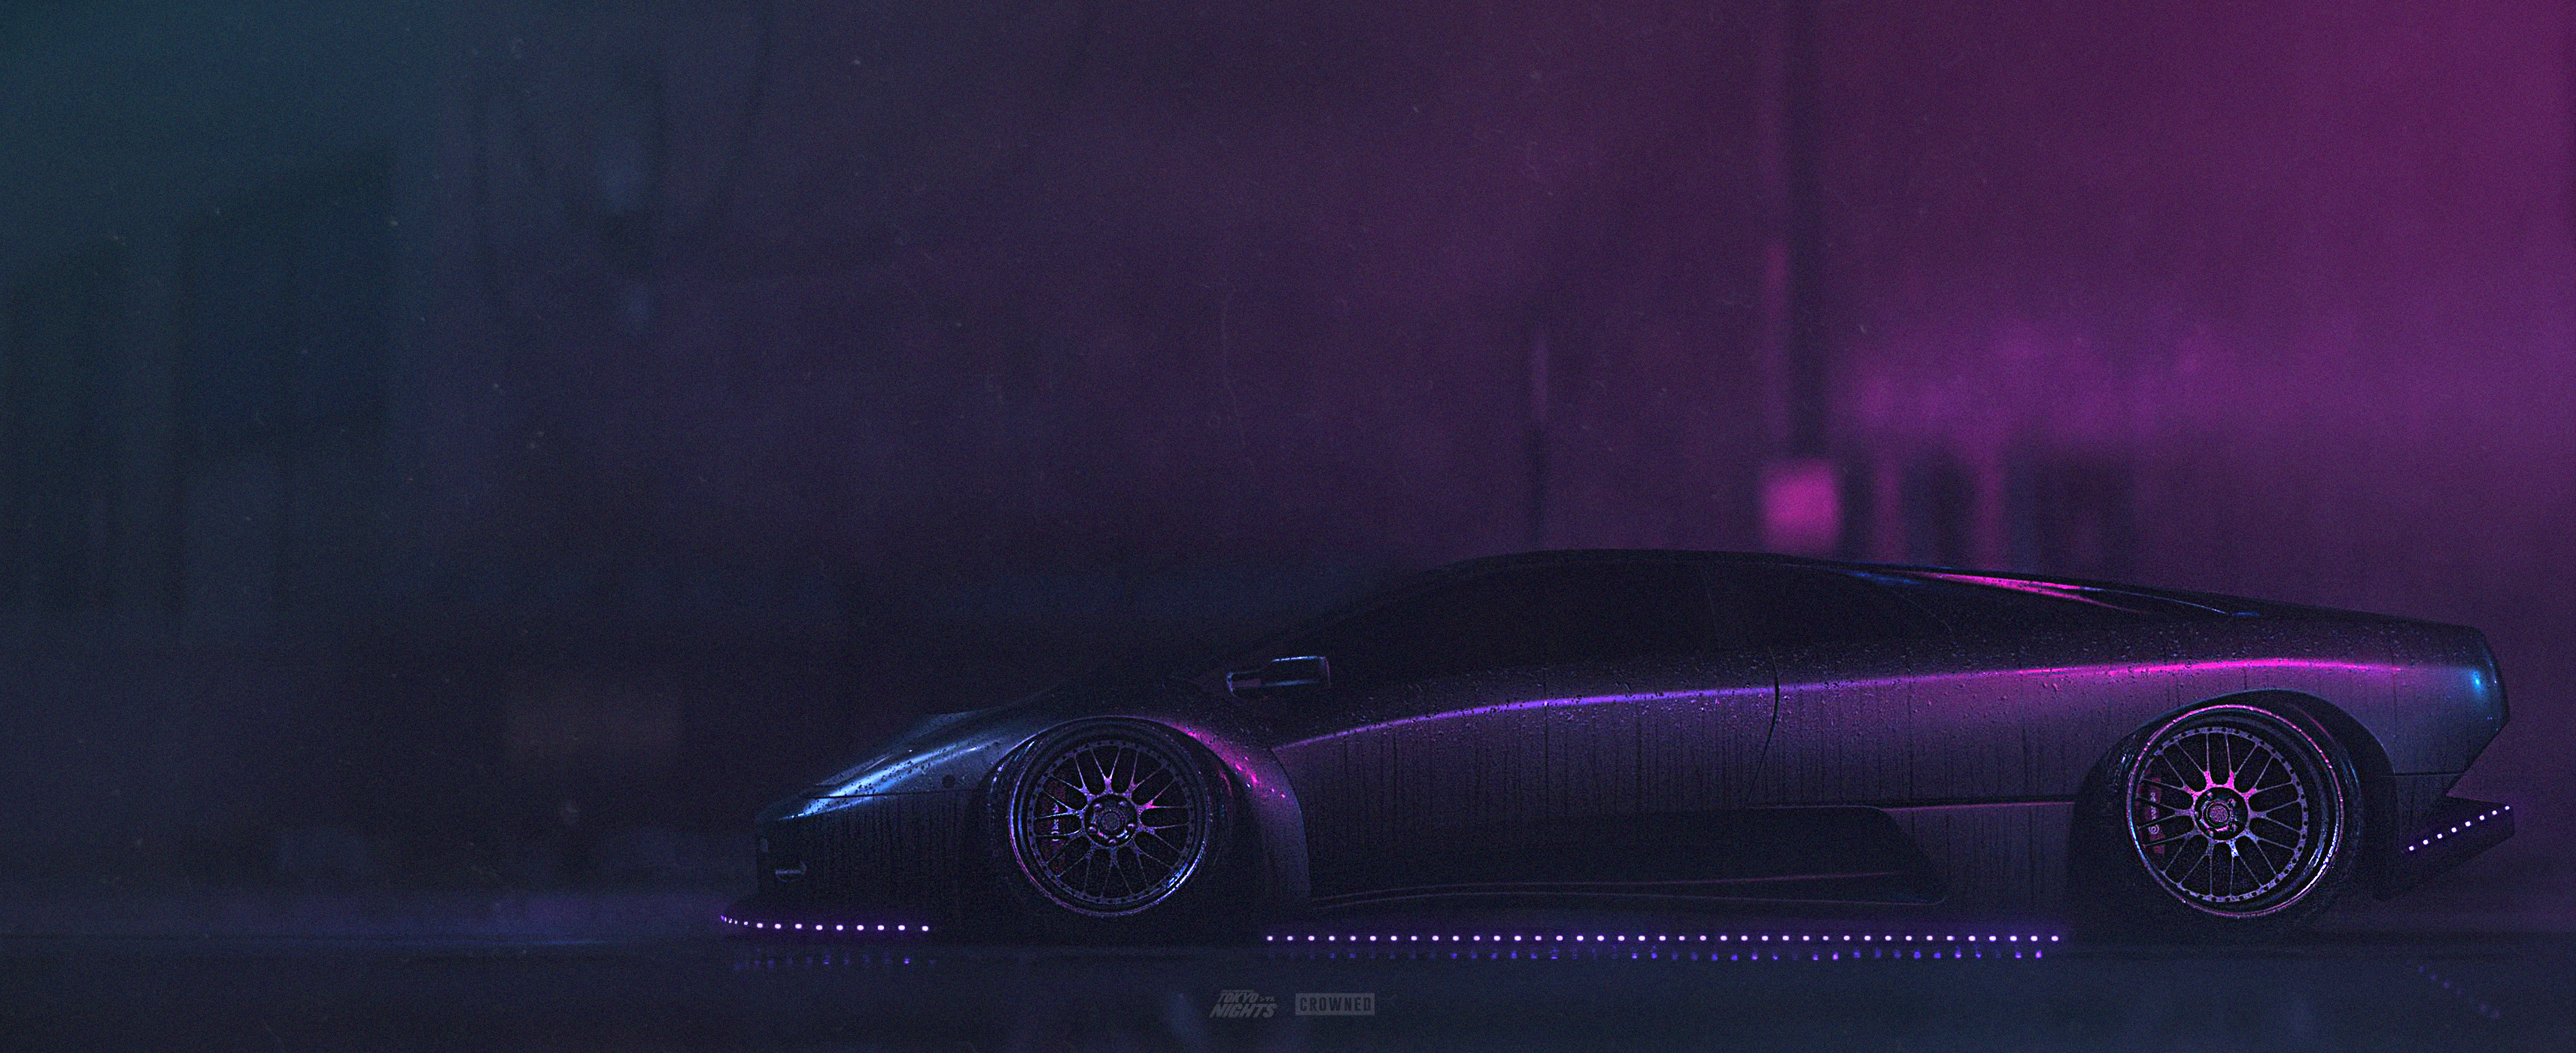 CROWNED Need For Speed Car Vehicle Purple 3424x1400